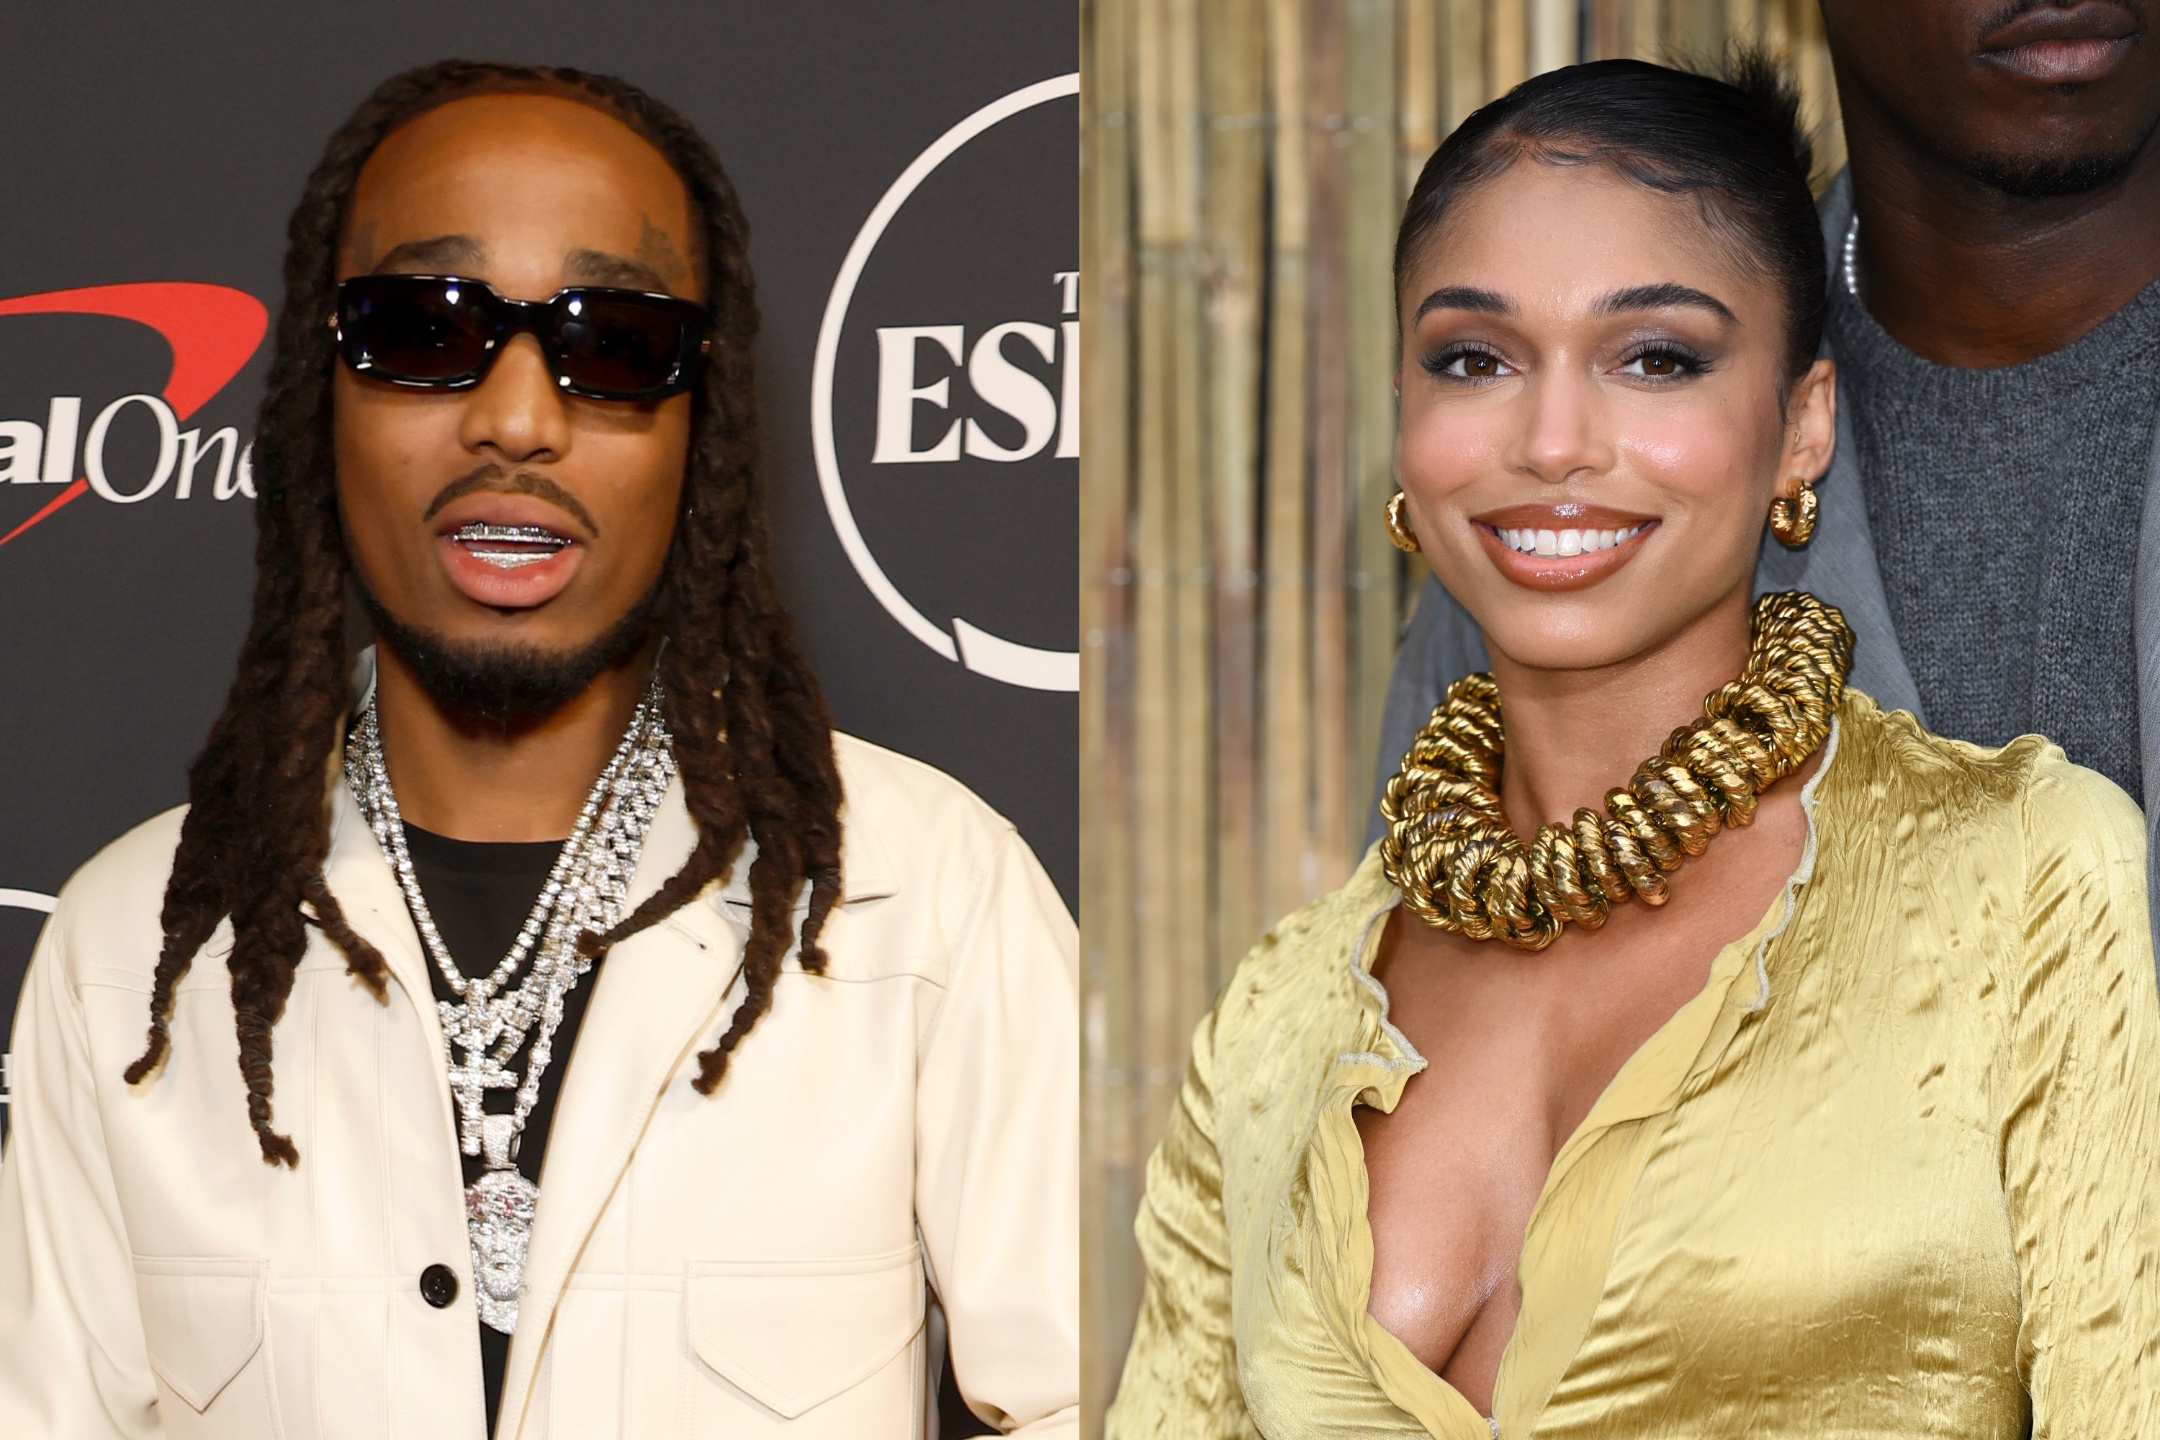 Lori Harvey sets the record straight on rumors she had lunch date